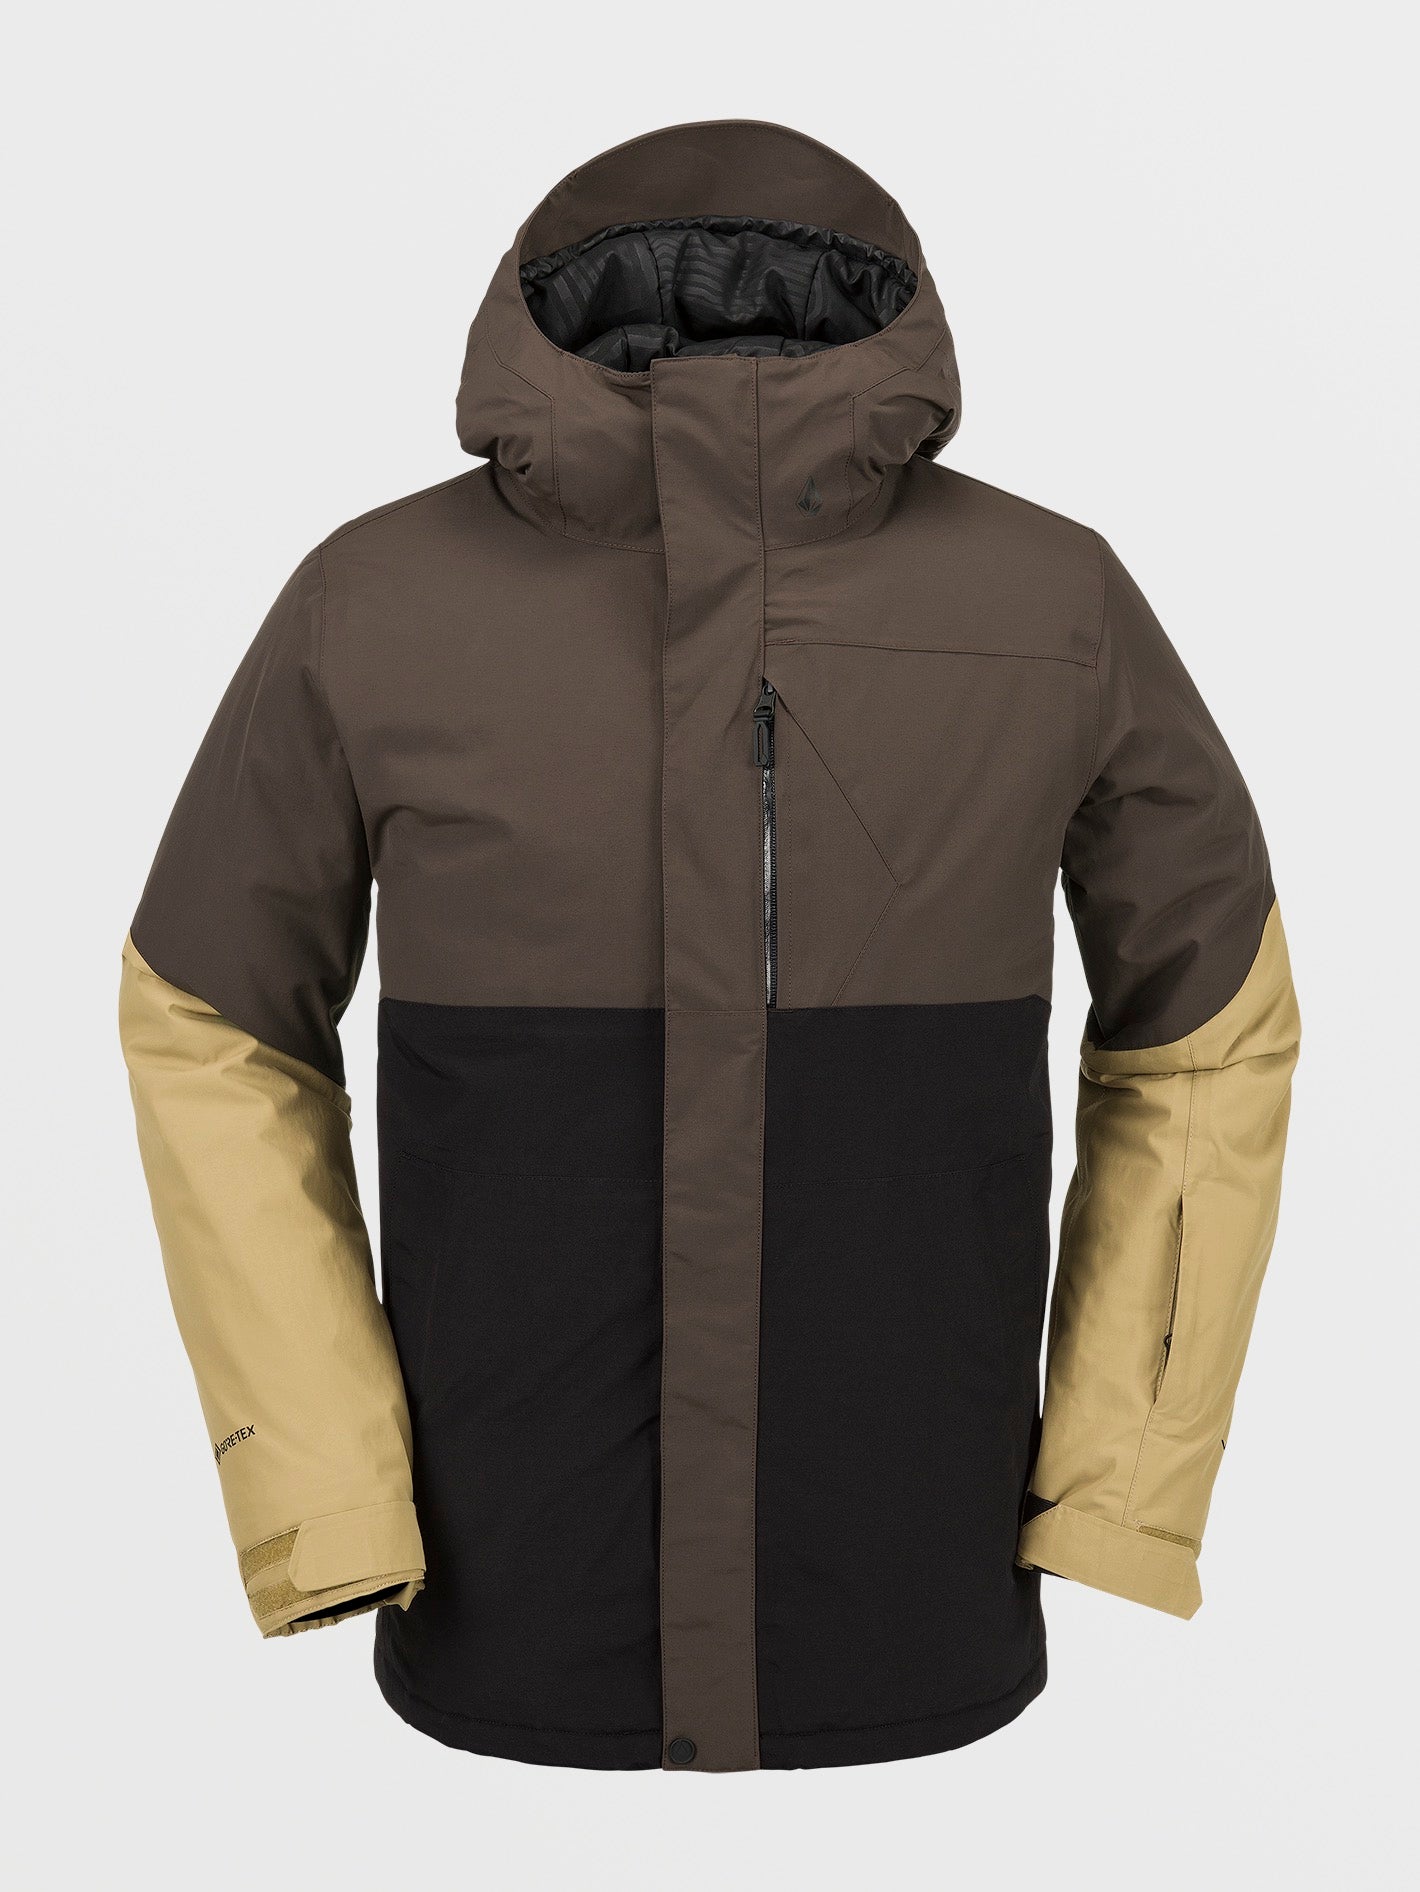 Mens L Insulated Gore-Tex Jacket - Brown